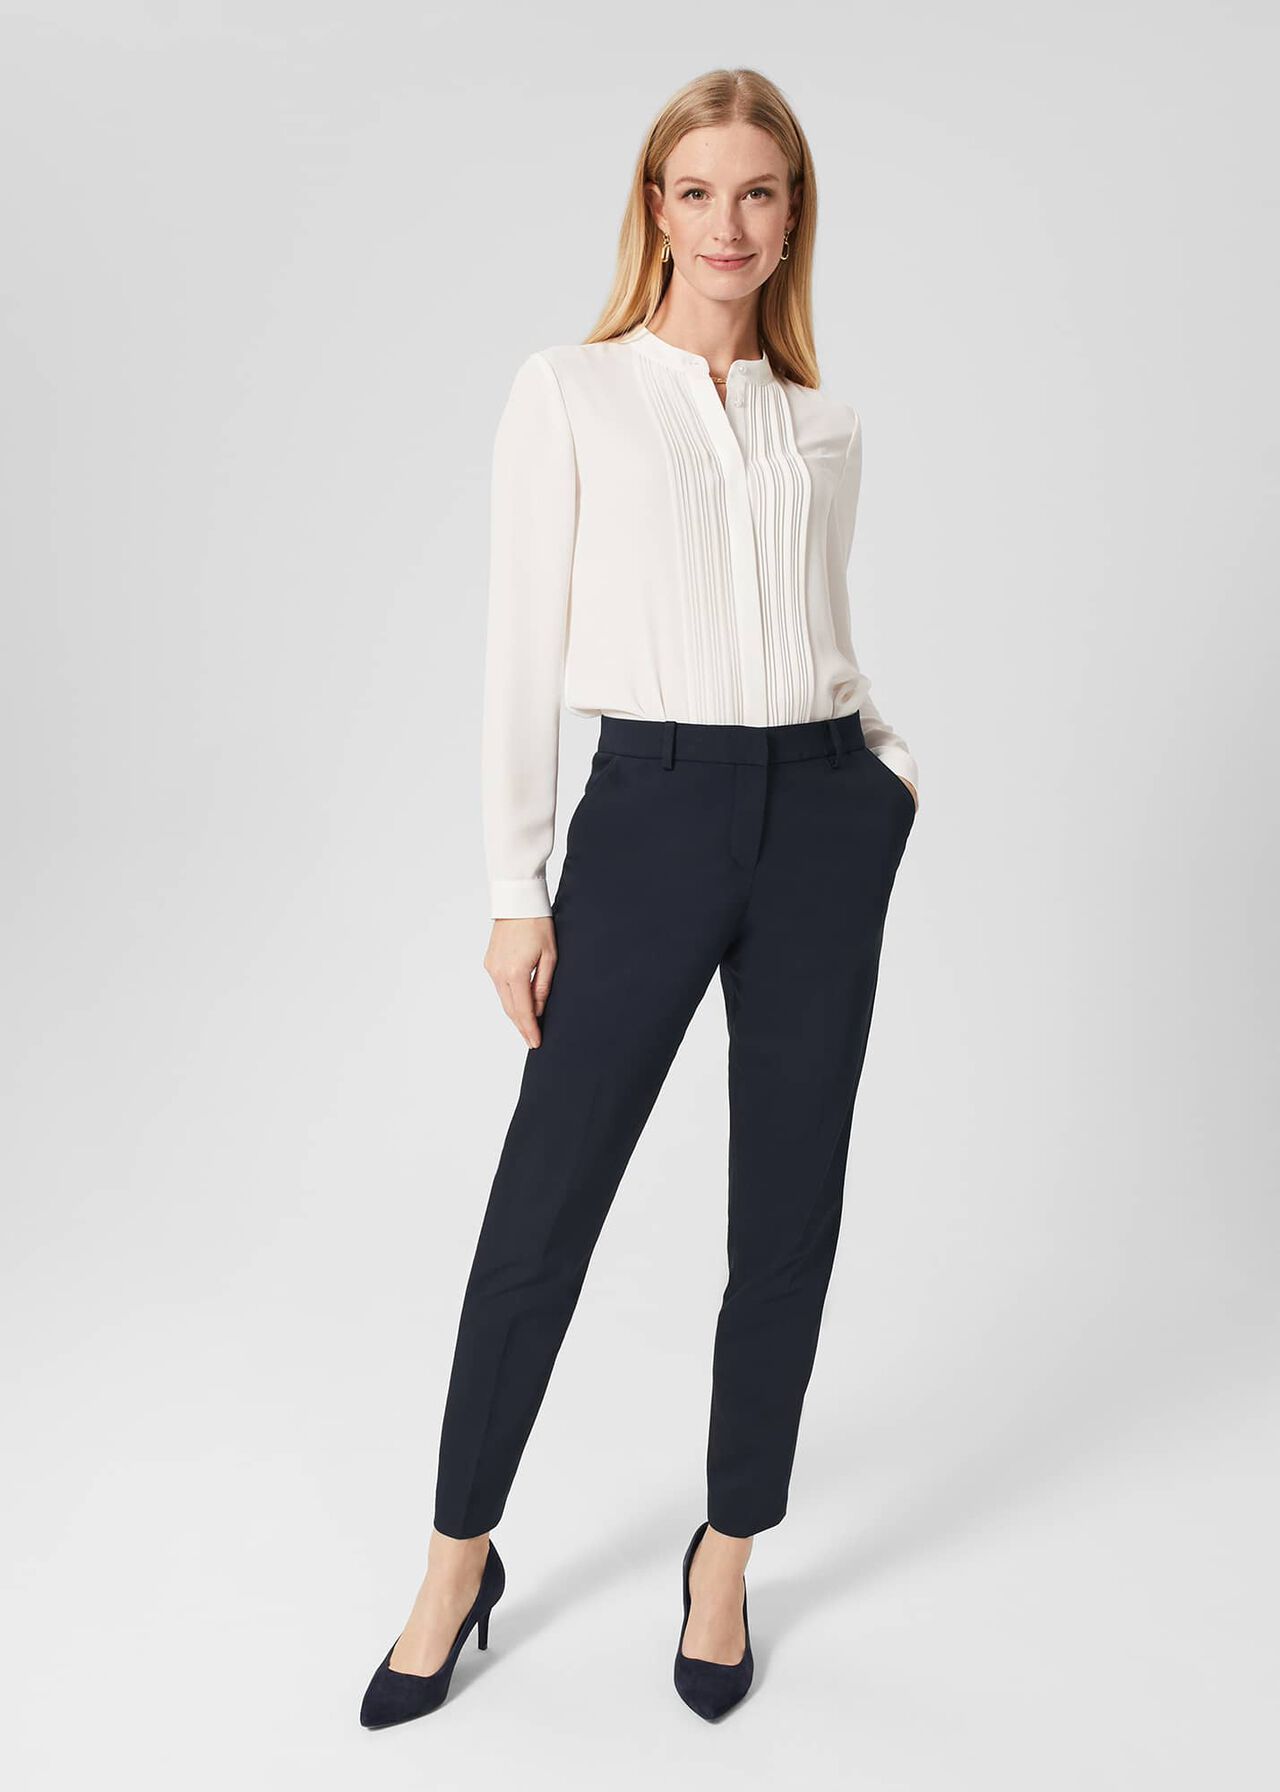 Connie Blouse, Ivory, hi-res